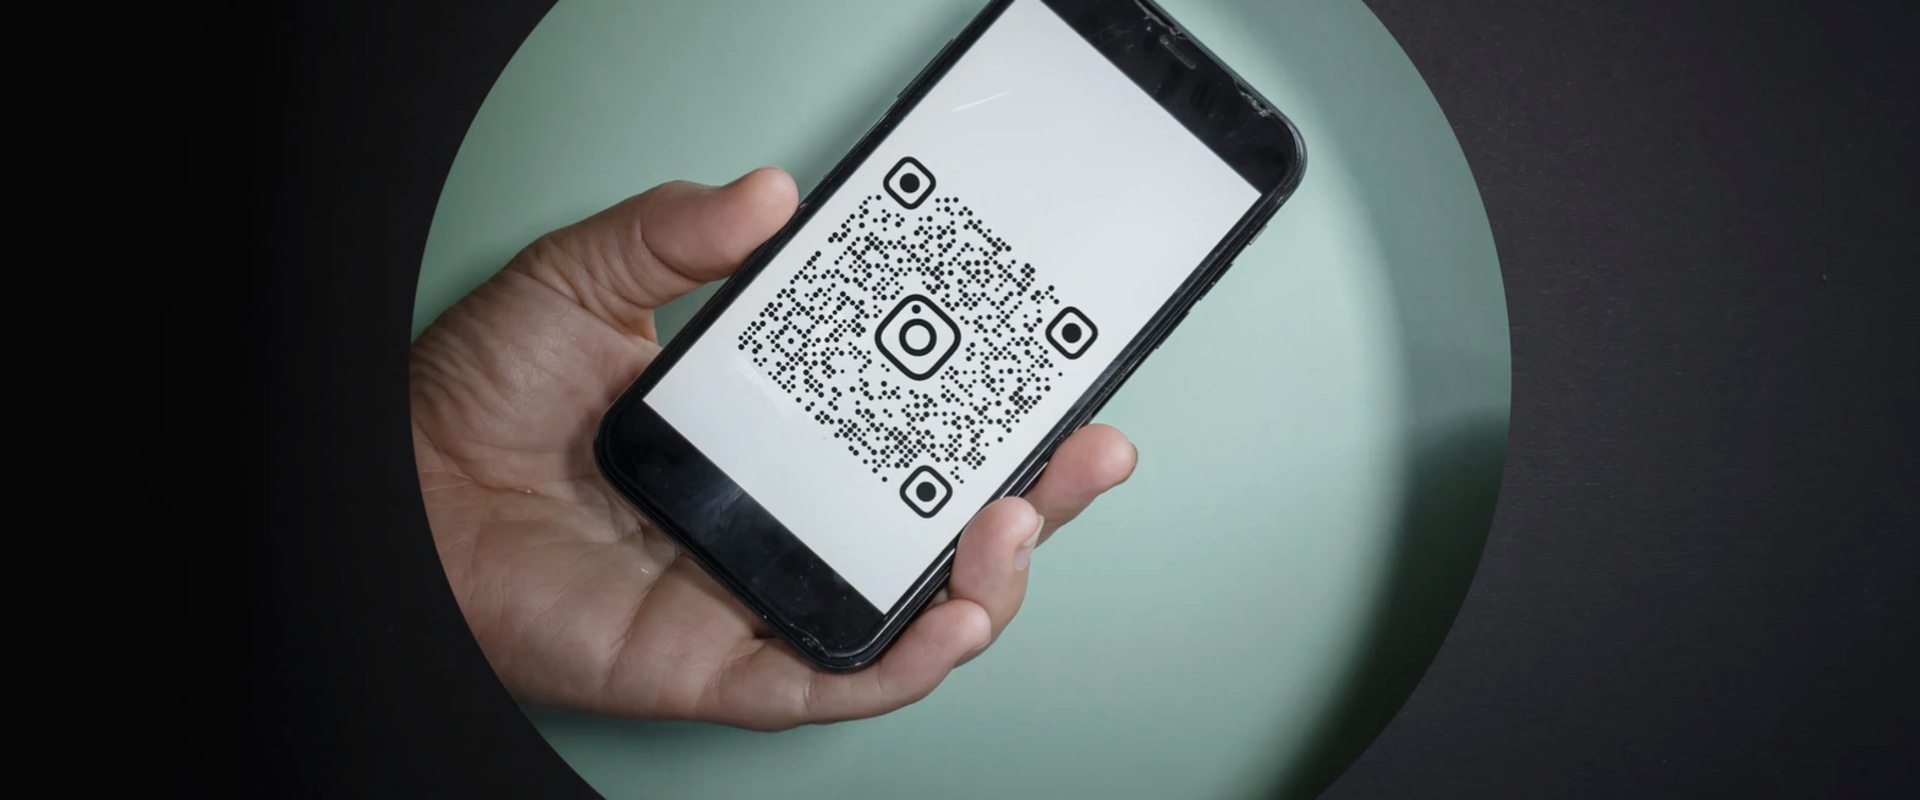 Scanning a QR Code with an iOS Device